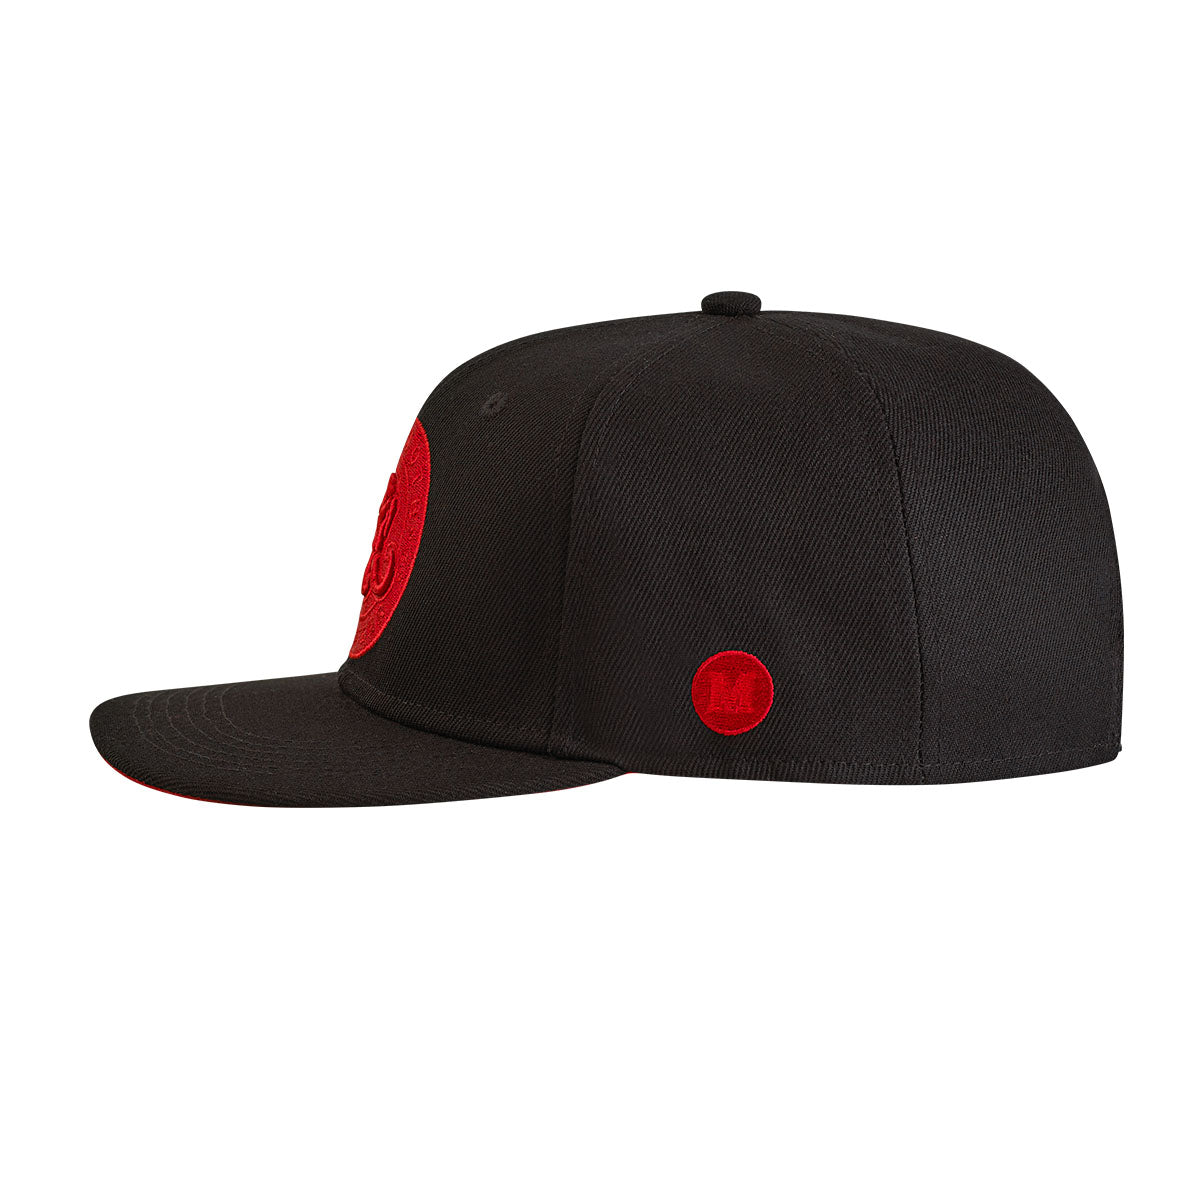 black and red snapback profile